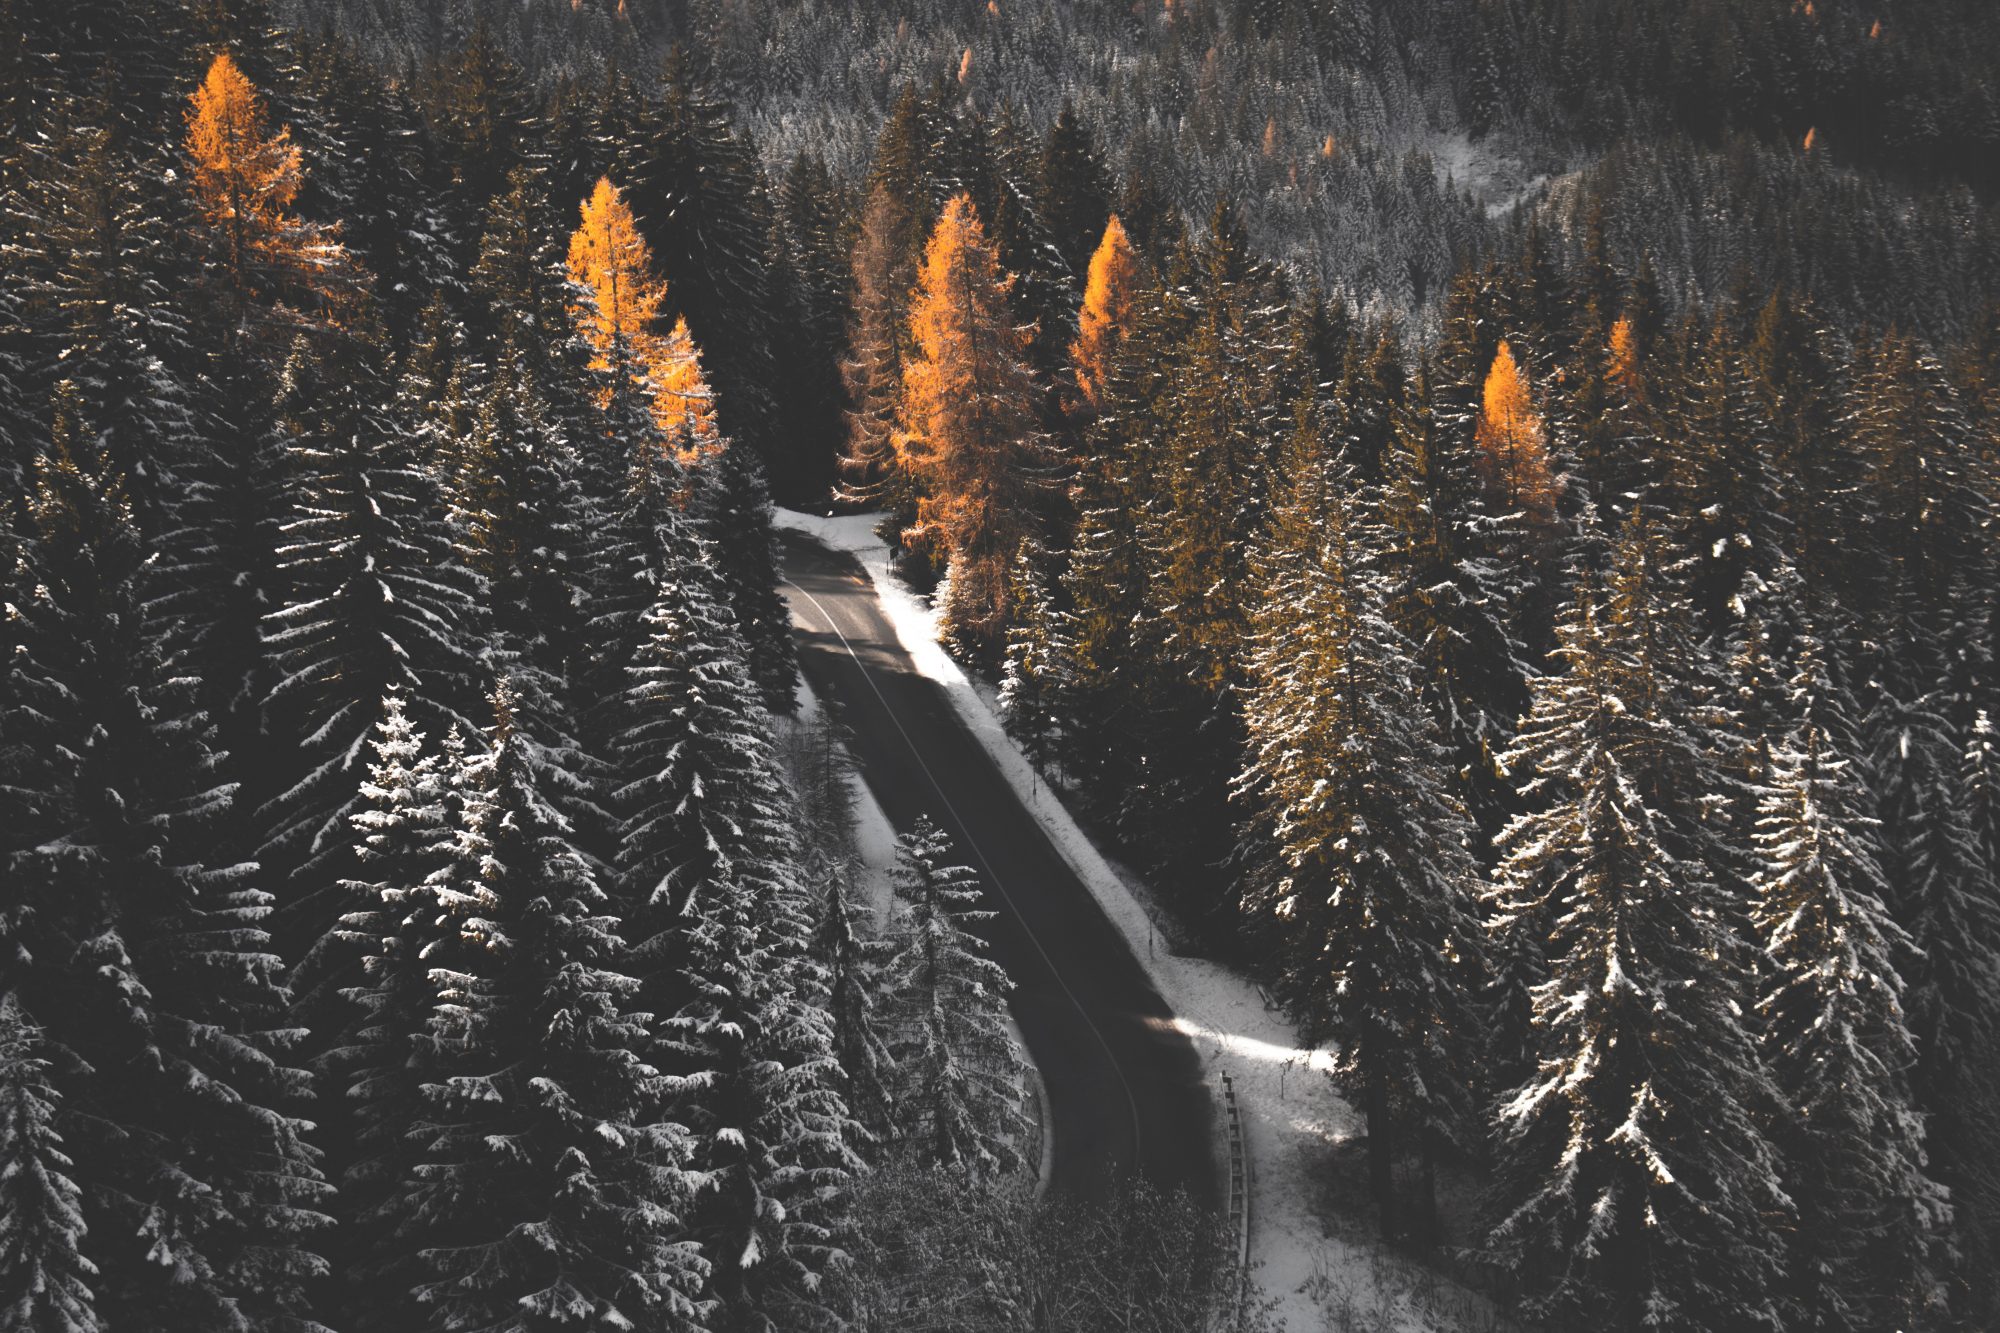 Snowy road - Photo Daniel Plan - Unsplash. Driving to the mountains.